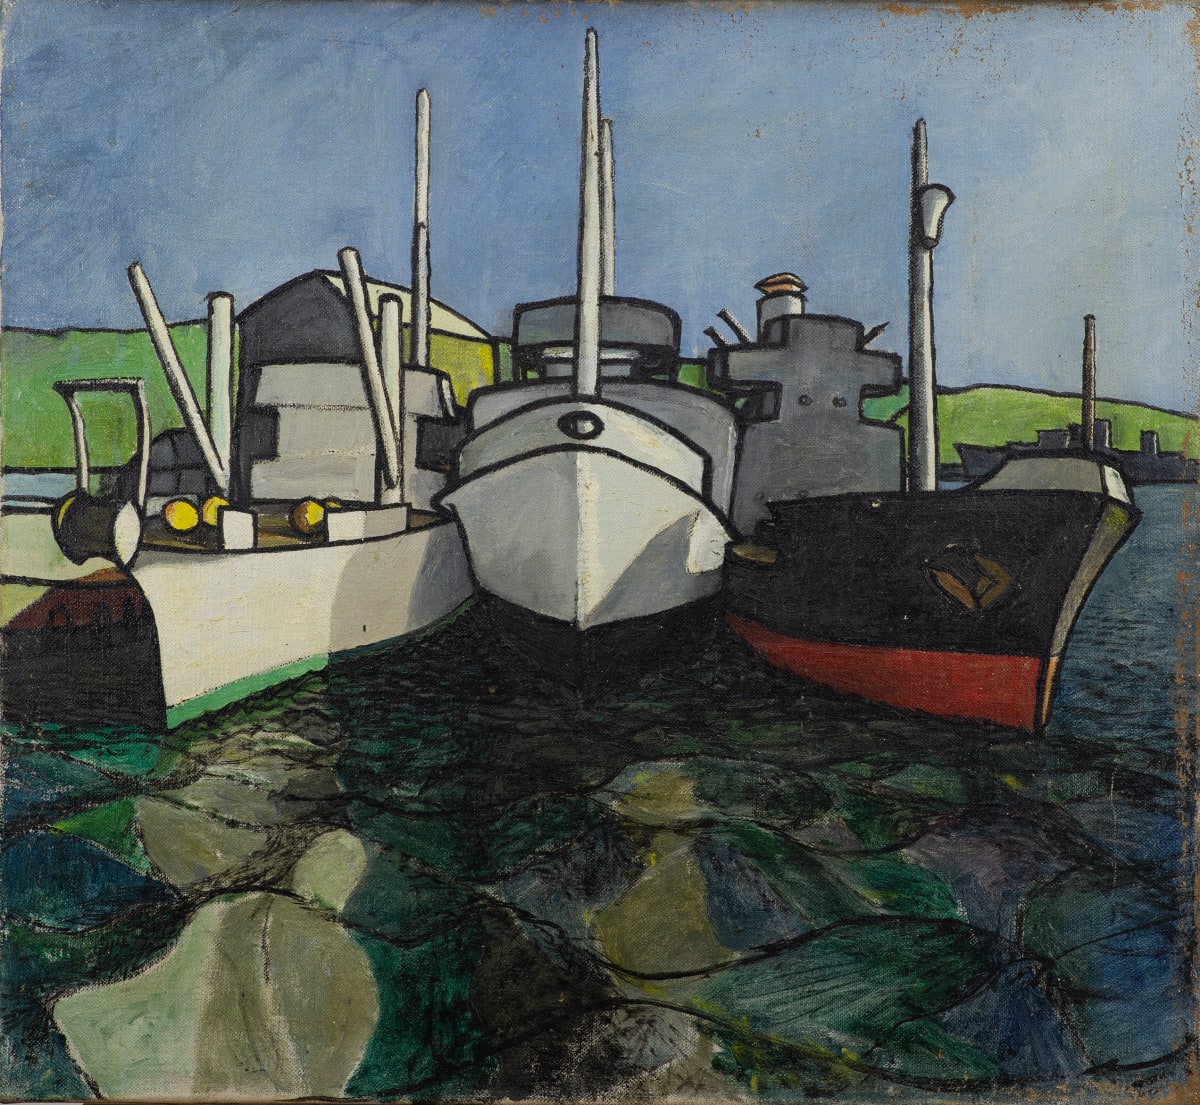 Marine Boats (from Marine Series) by Michael Lester  Image: Recto